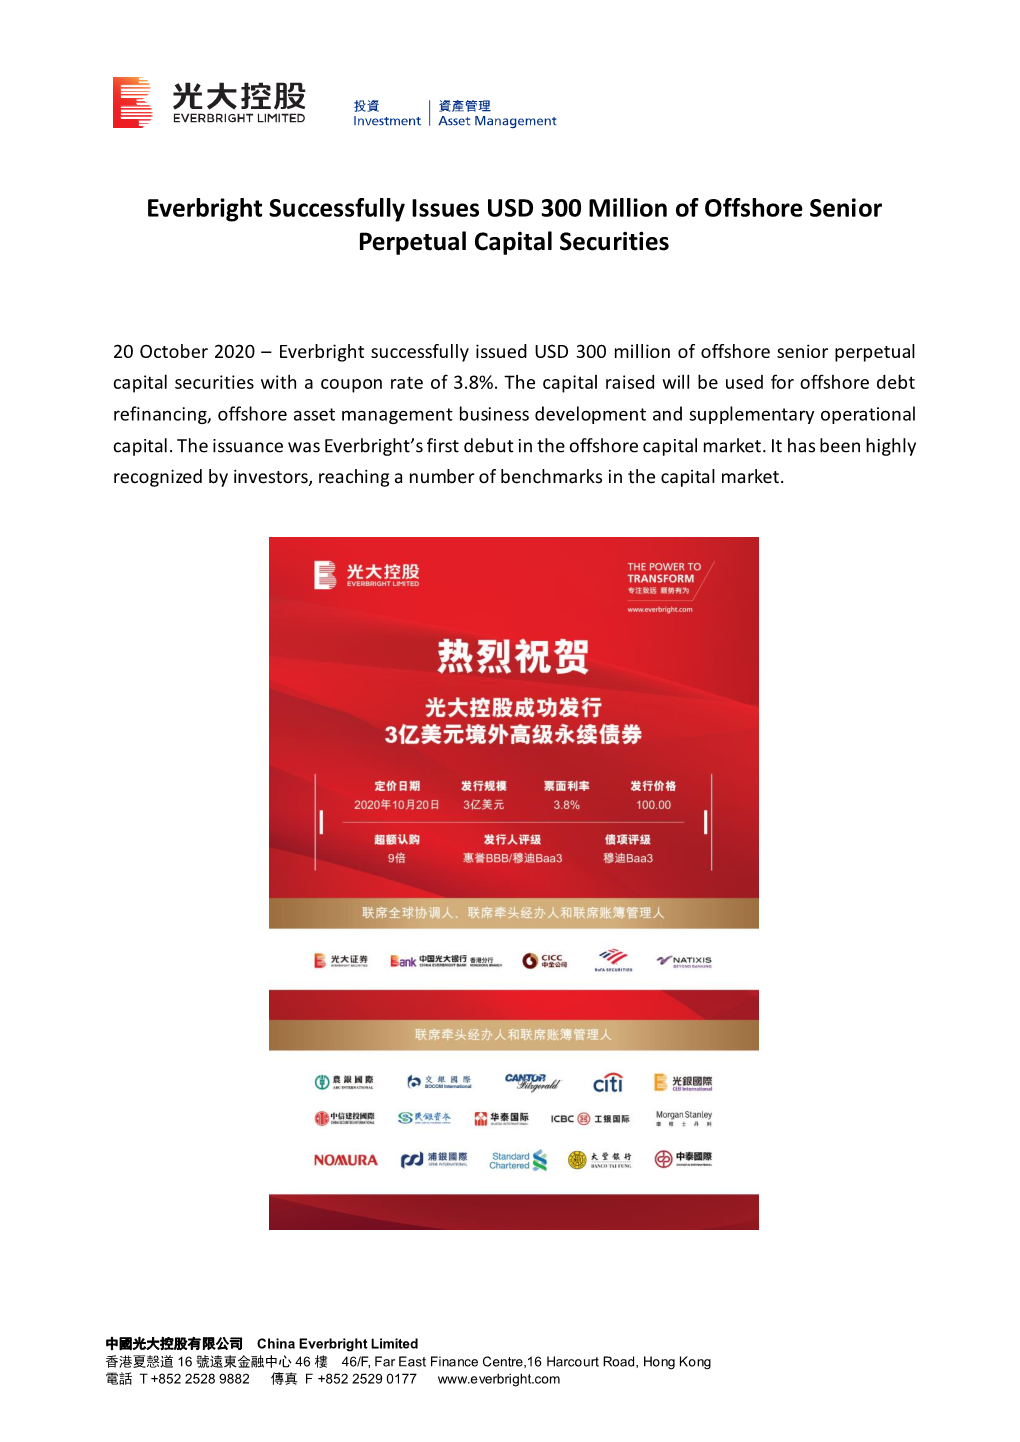 Everbright Successfully Issues USD 300 Million of Offshore Senior Perpetual Capital Securities